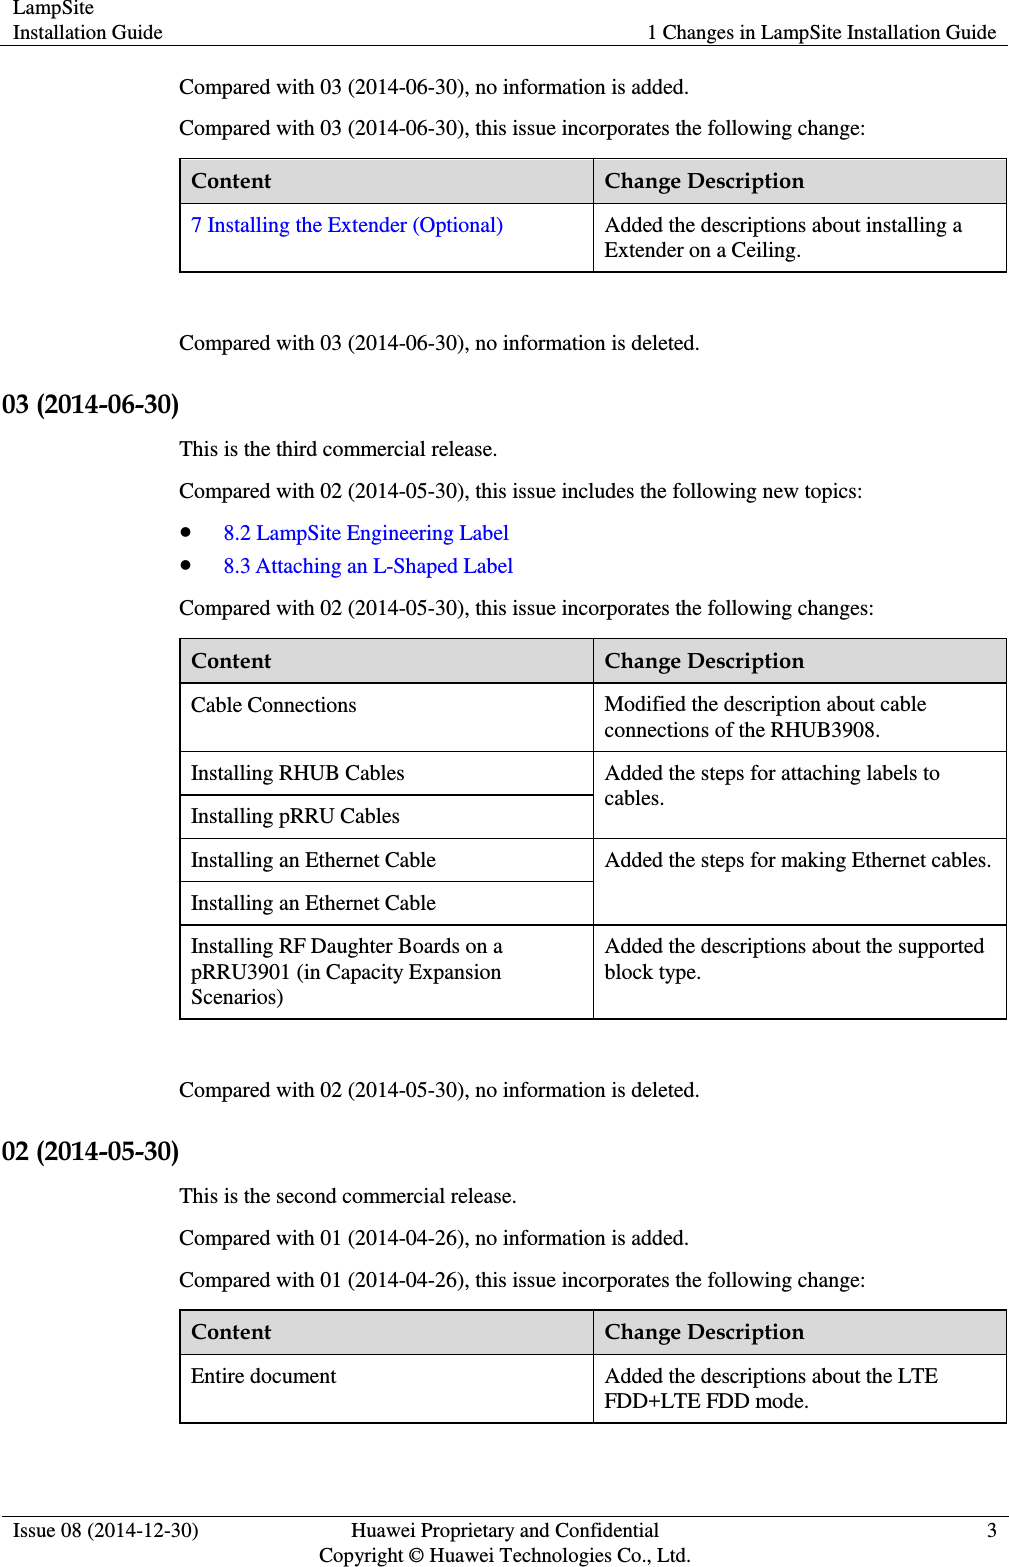 LampSite Installation Guide 1 Changes in LampSite Installation Guide  Issue 08 (2014-12-30) Huawei Proprietary and Confidential                                     Copyright © Huawei Technologies Co., Ltd. 3  Compared with 03 (2014-06-30), no information is added. Compared with 03 (2014-06-30), this issue incorporates the following change: Content Change Description 7 Installing the Extender (Optional) Added the descriptions about installing a Extender on a Ceiling.  Compared with 03 (2014-06-30), no information is deleted. 03 (2014-06-30) This is the third commercial release. Compared with 02 (2014-05-30), this issue includes the following new topics:  8.2 LampSite Engineering Label  8.3 Attaching an L-Shaped Label Compared with 02 (2014-05-30), this issue incorporates the following changes: Content Change Description Cable Connections Modified the description about cable connections of the RHUB3908. Installing RHUB Cables Added the steps for attaching labels to cables. Installing pRRU Cables Installing an Ethernet Cable Added the steps for making Ethernet cables. Installing an Ethernet Cable Installing RF Daughter Boards on a pRRU3901 (in Capacity Expansion Scenarios) Added the descriptions about the supported block type.  Compared with 02 (2014-05-30), no information is deleted. 02 (2014-05-30) This is the second commercial release. Compared with 01 (2014-04-26), no information is added. Compared with 01 (2014-04-26), this issue incorporates the following change: Content Change Description Entire document Added the descriptions about the LTE FDD+LTE FDD mode.  